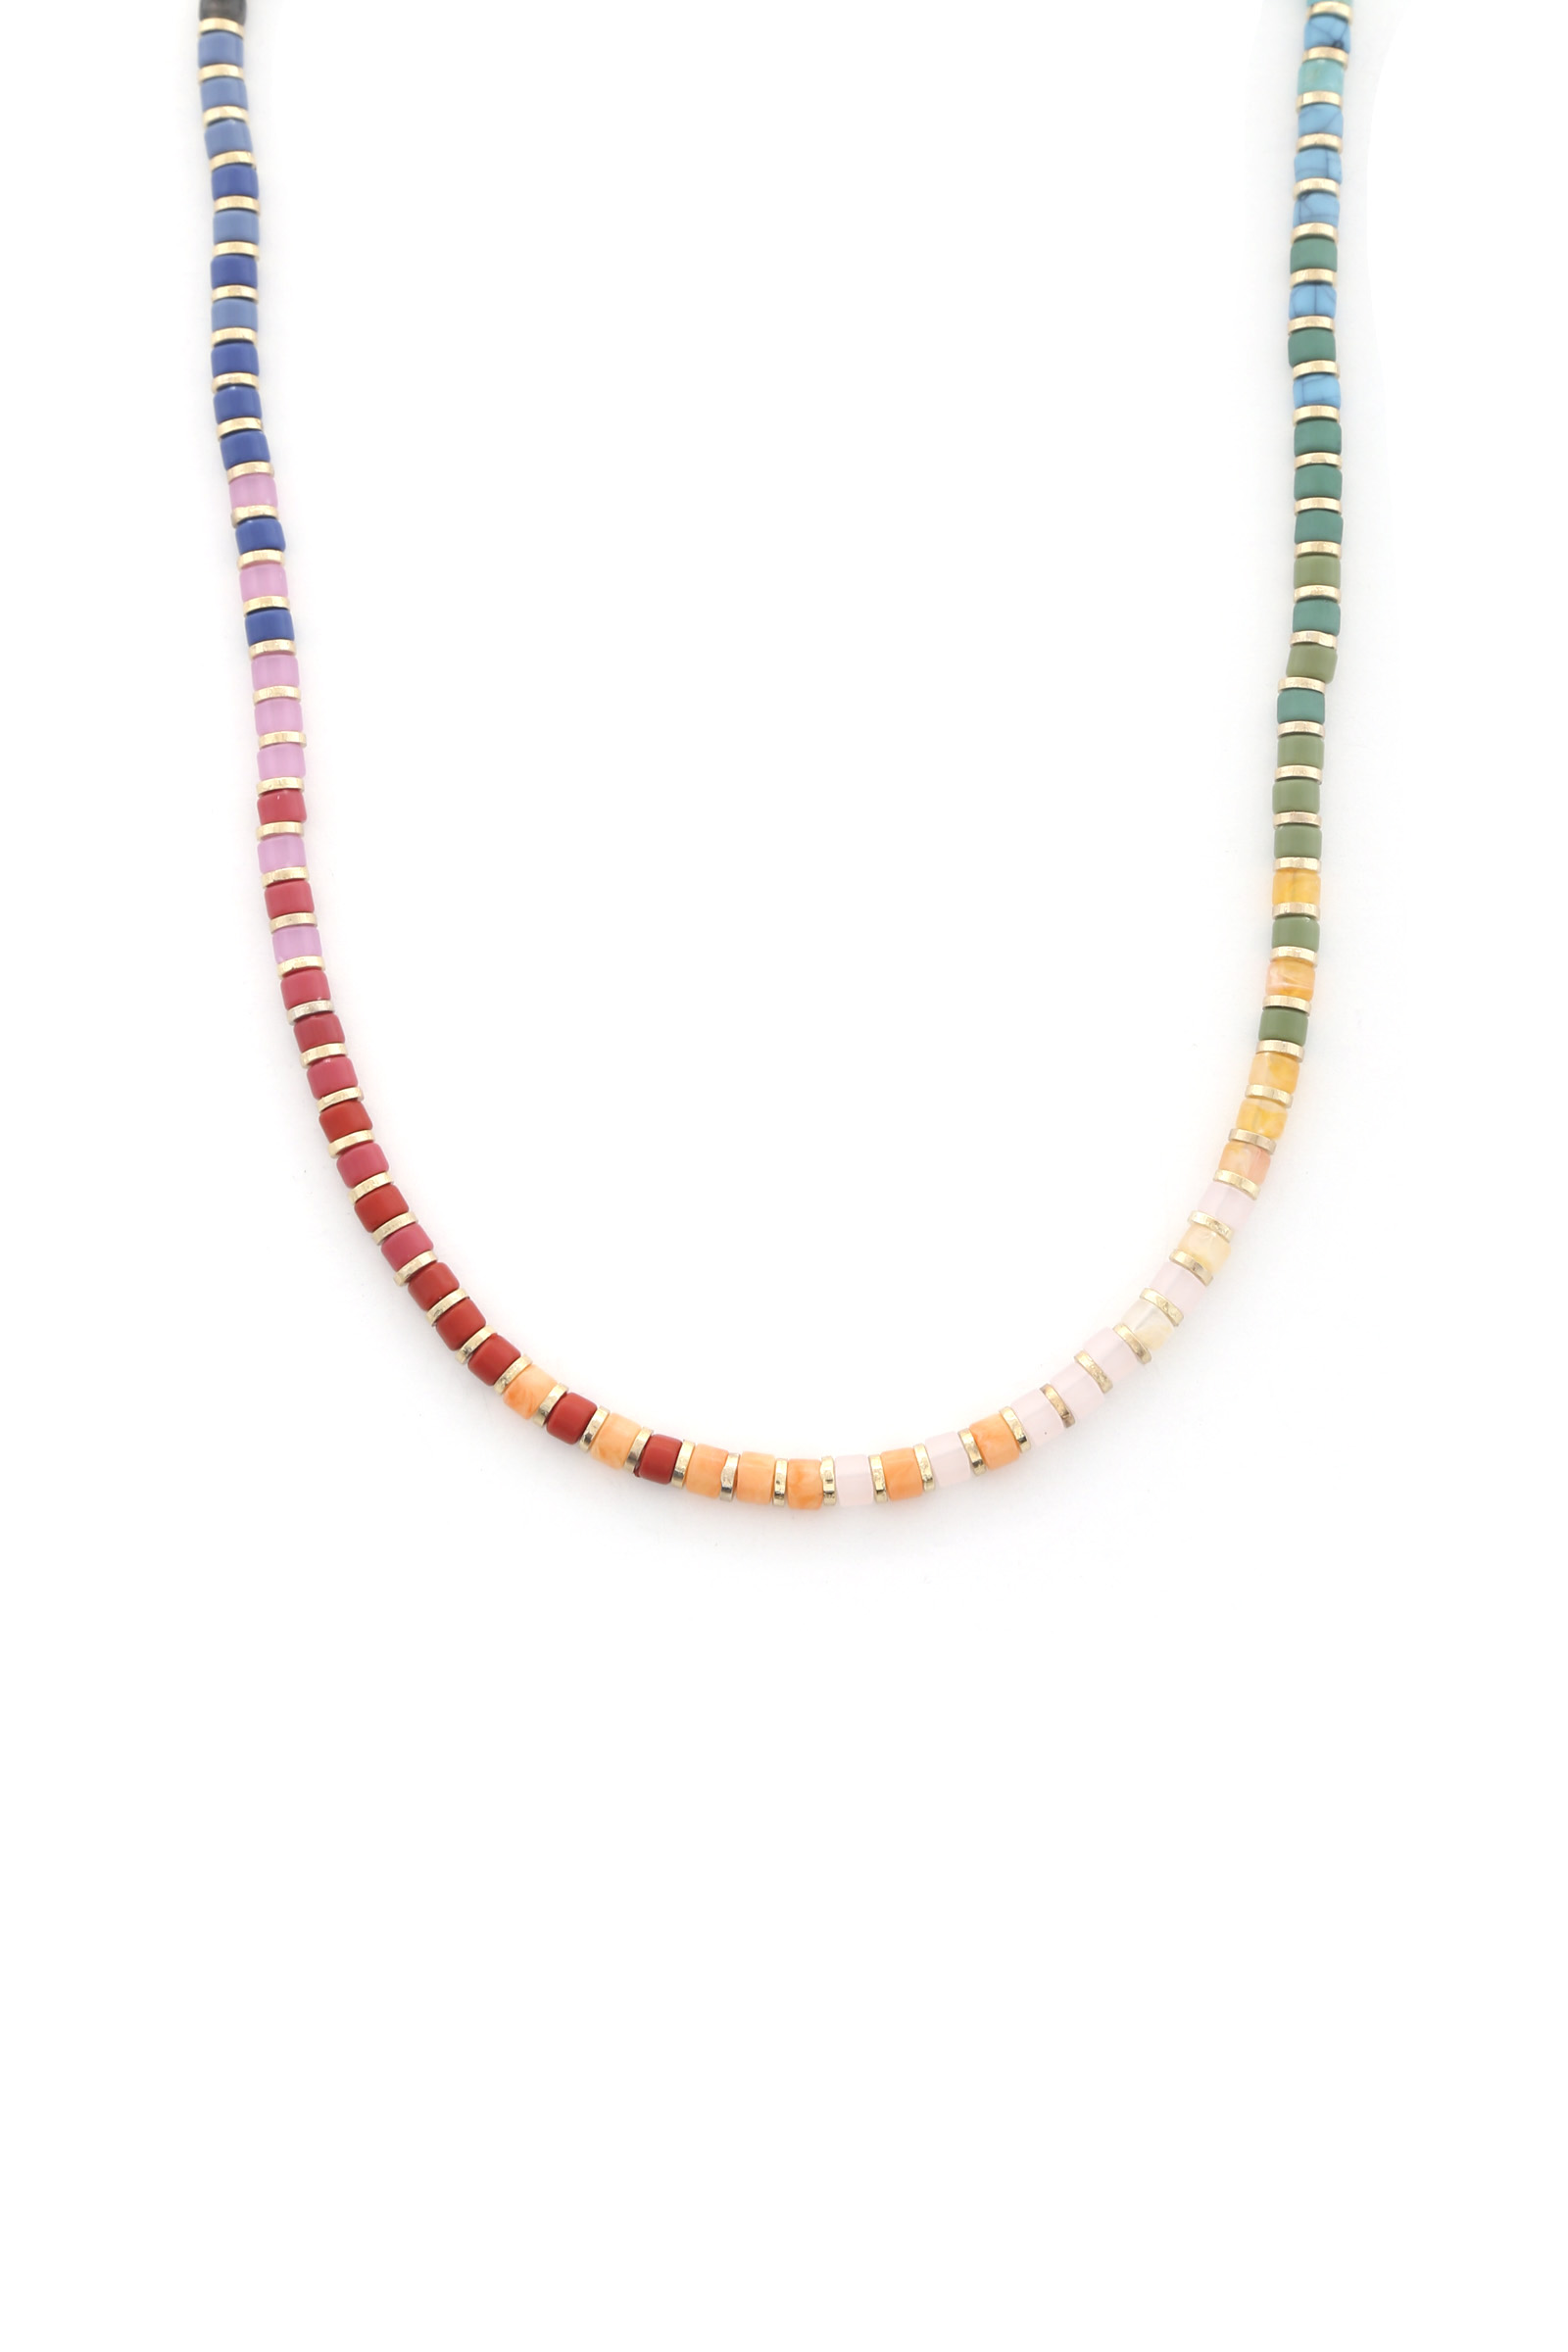 COLORFUL BEAD NECKLACE